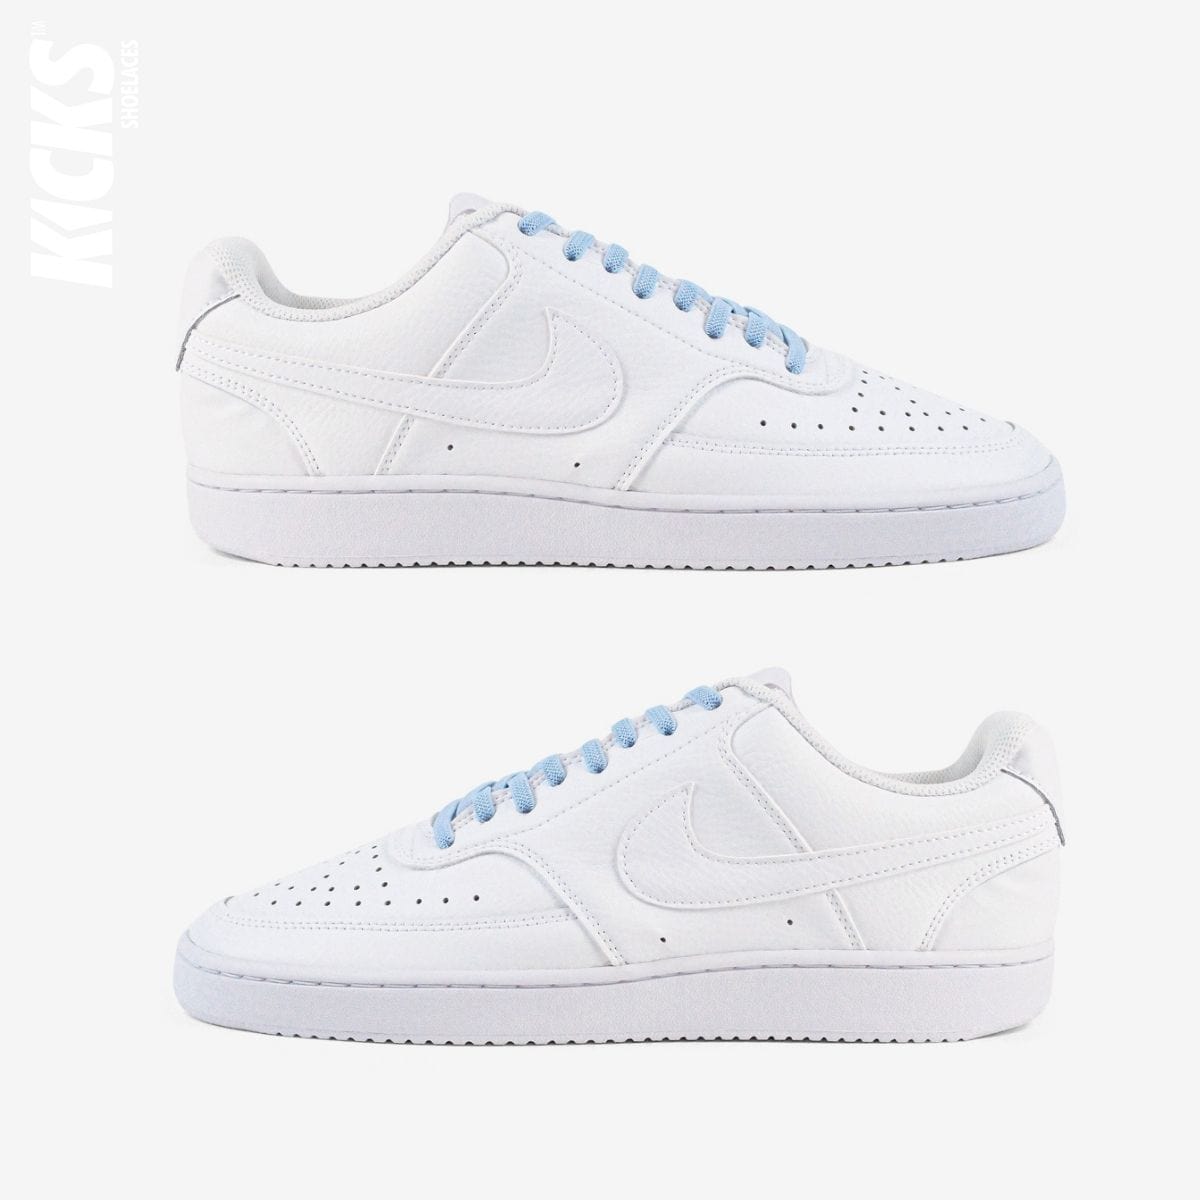 tieless-laces-with-sky-blue-laces-on-nike-white-sneakers-by-kicks-shoelaces